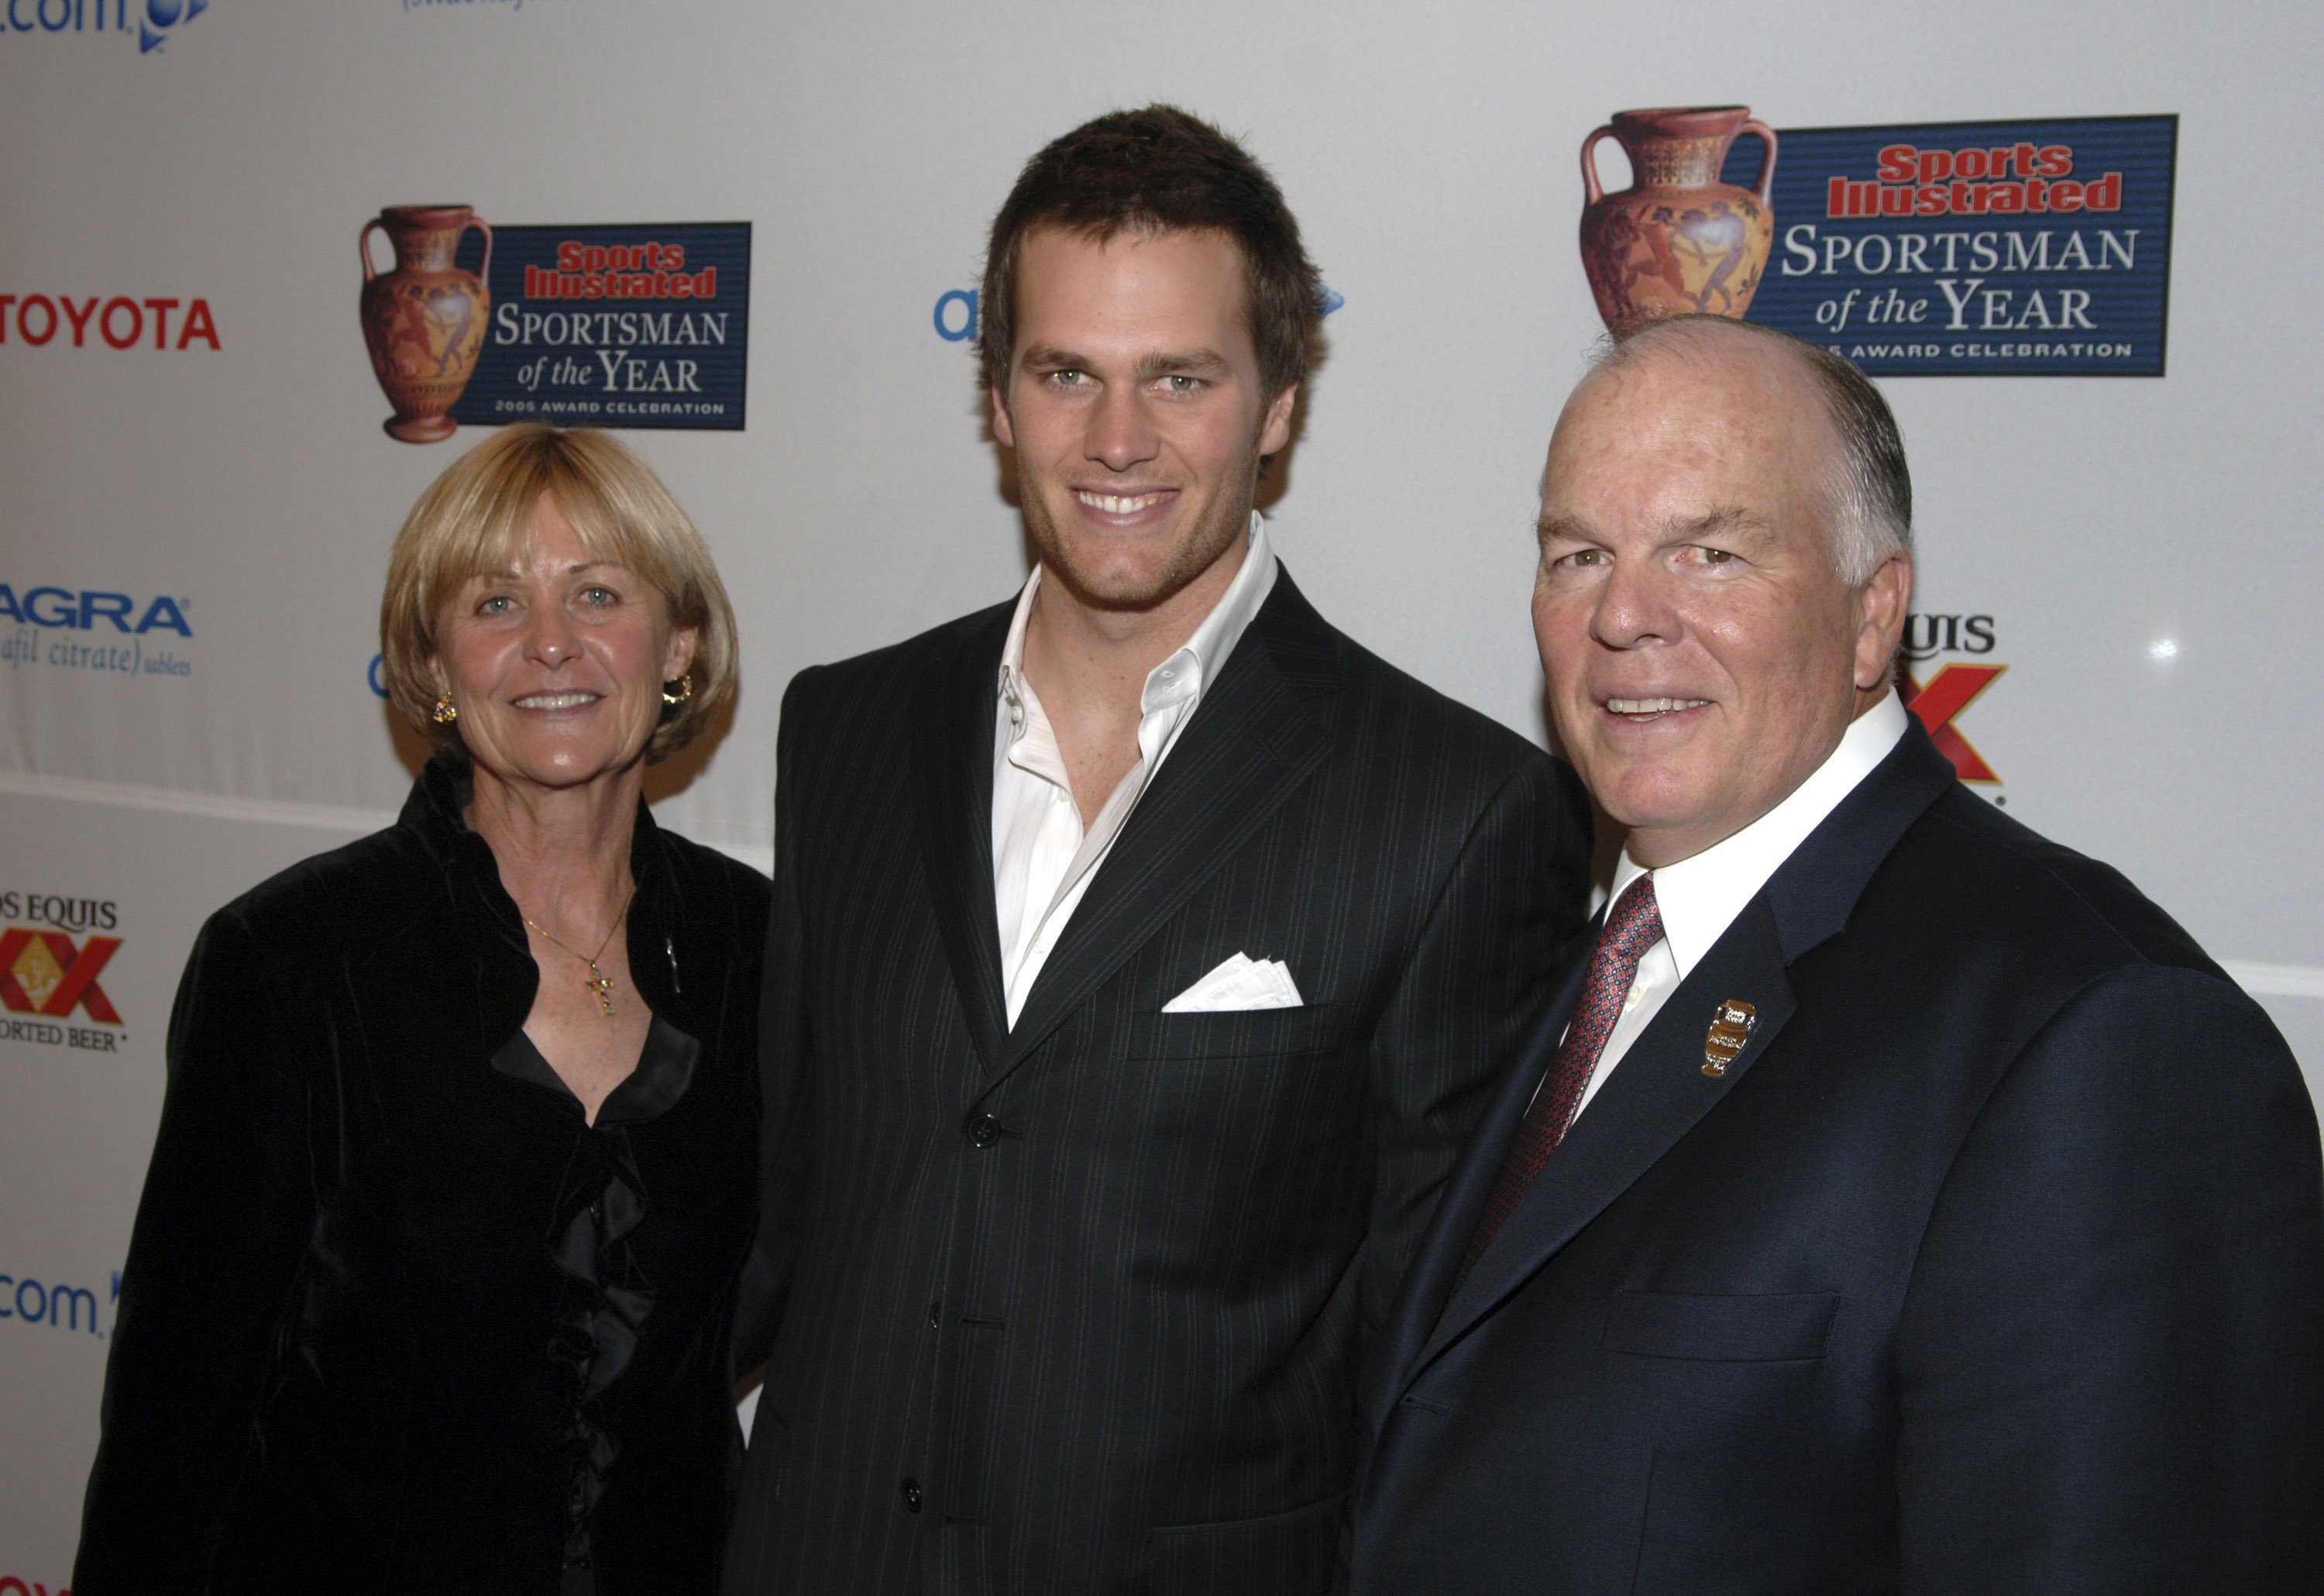 Galynn, Tom Brady Jr. and Tom Brady Sr. at the Sports Illustrated 2005 Sportsman of the Year Party on December 6, 2005 | Source: Getty Images